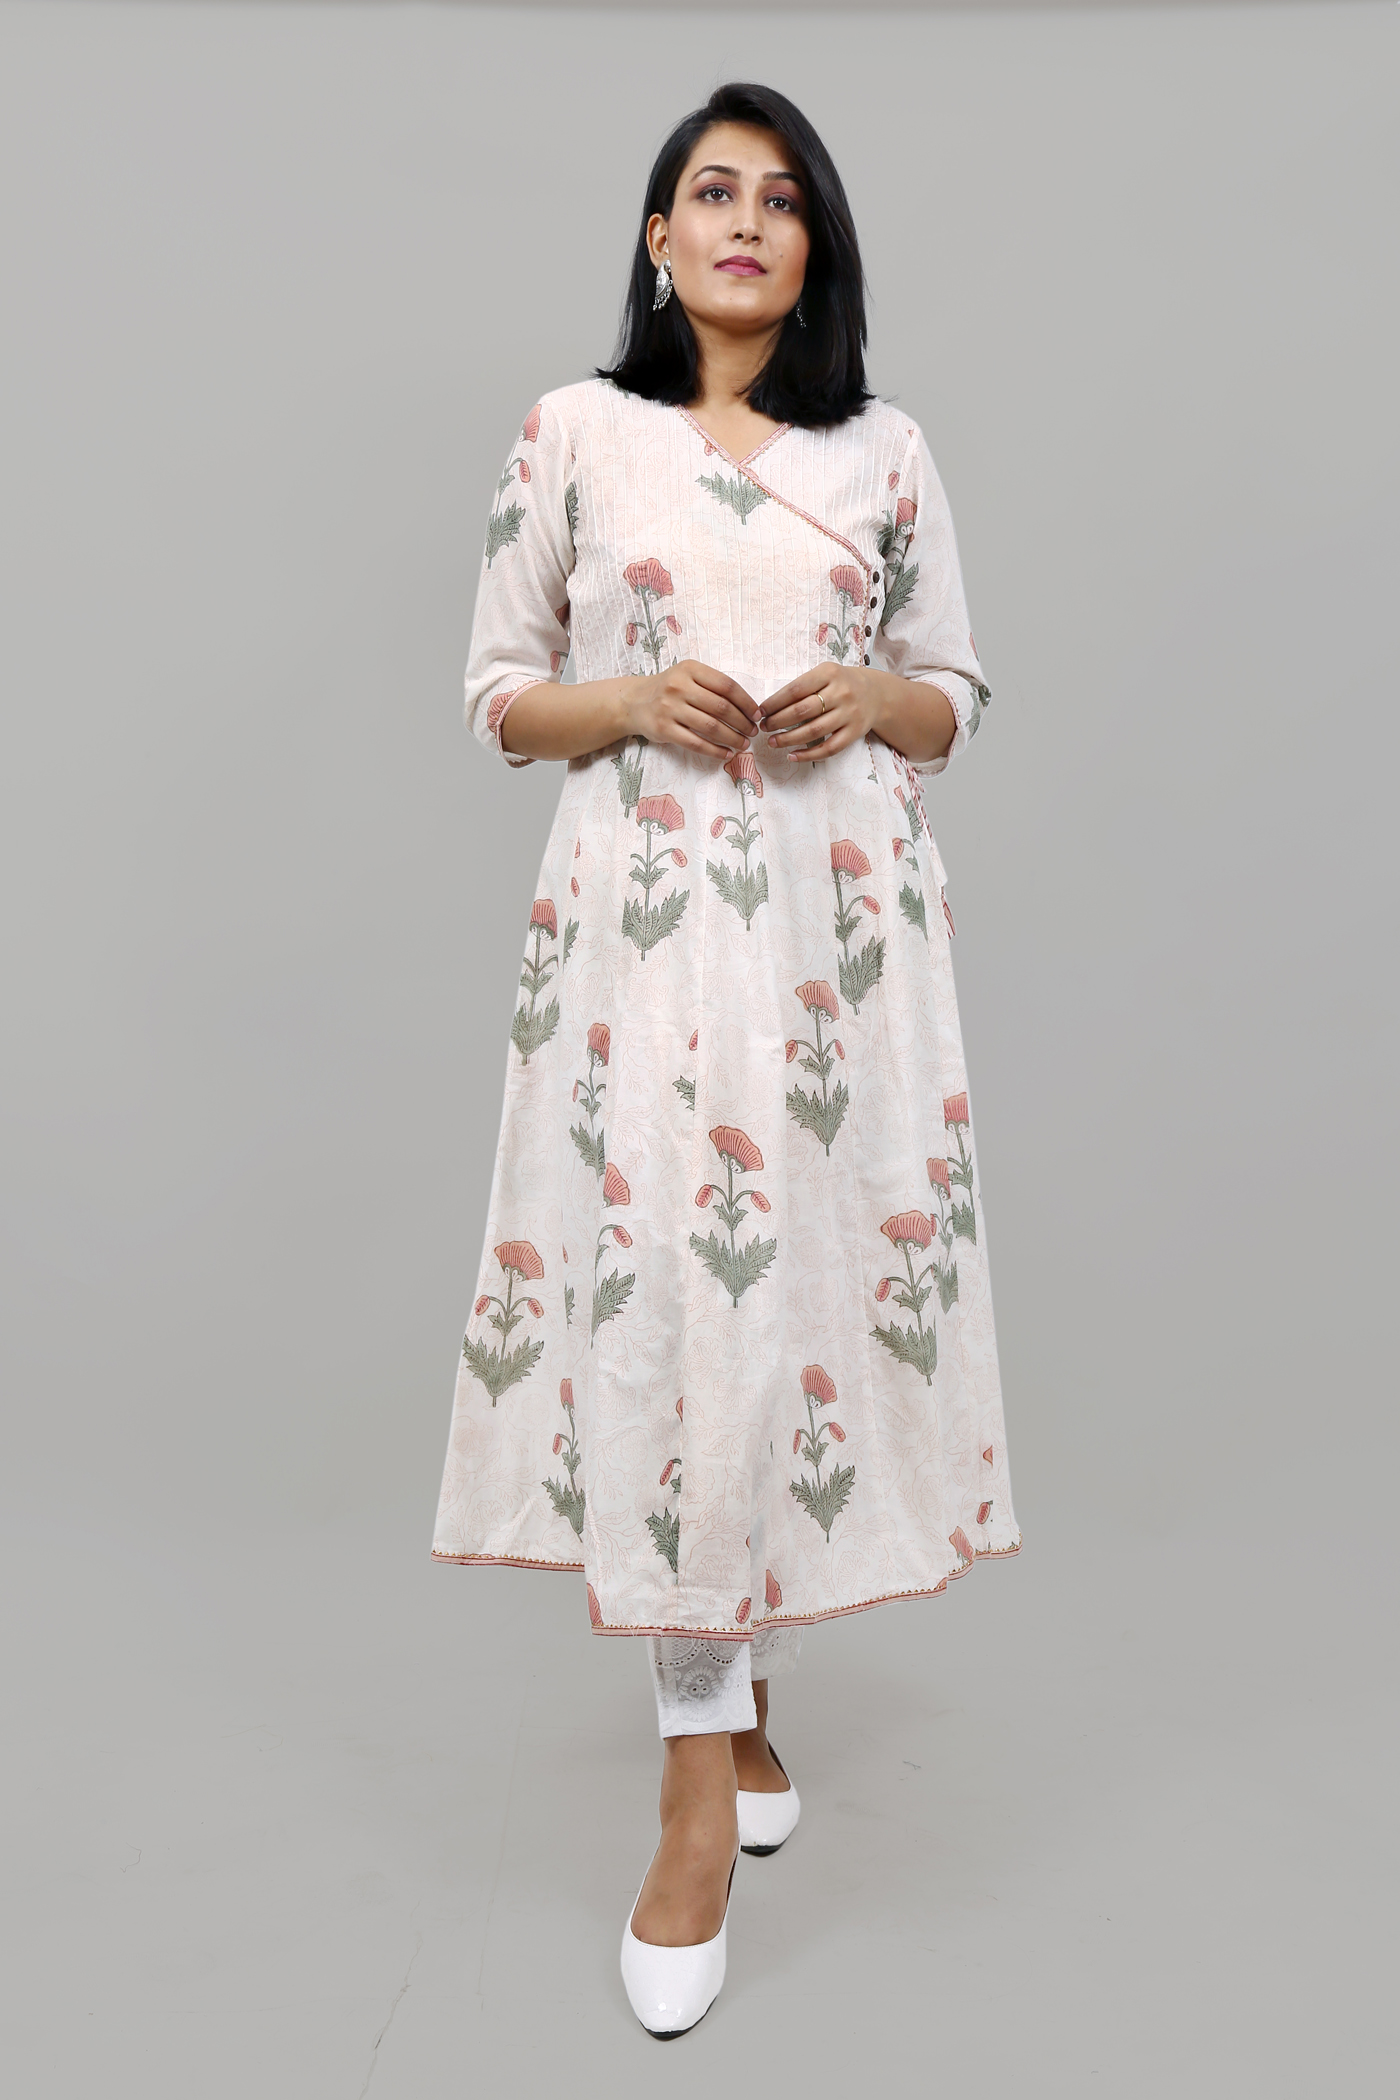 Dastkar is India's leading online store for unstitched dress material. We provide the latest designs and trends in dress material. Shop from a wide range of designs, fabrics, and colors to find the perfect match for your next outfit.